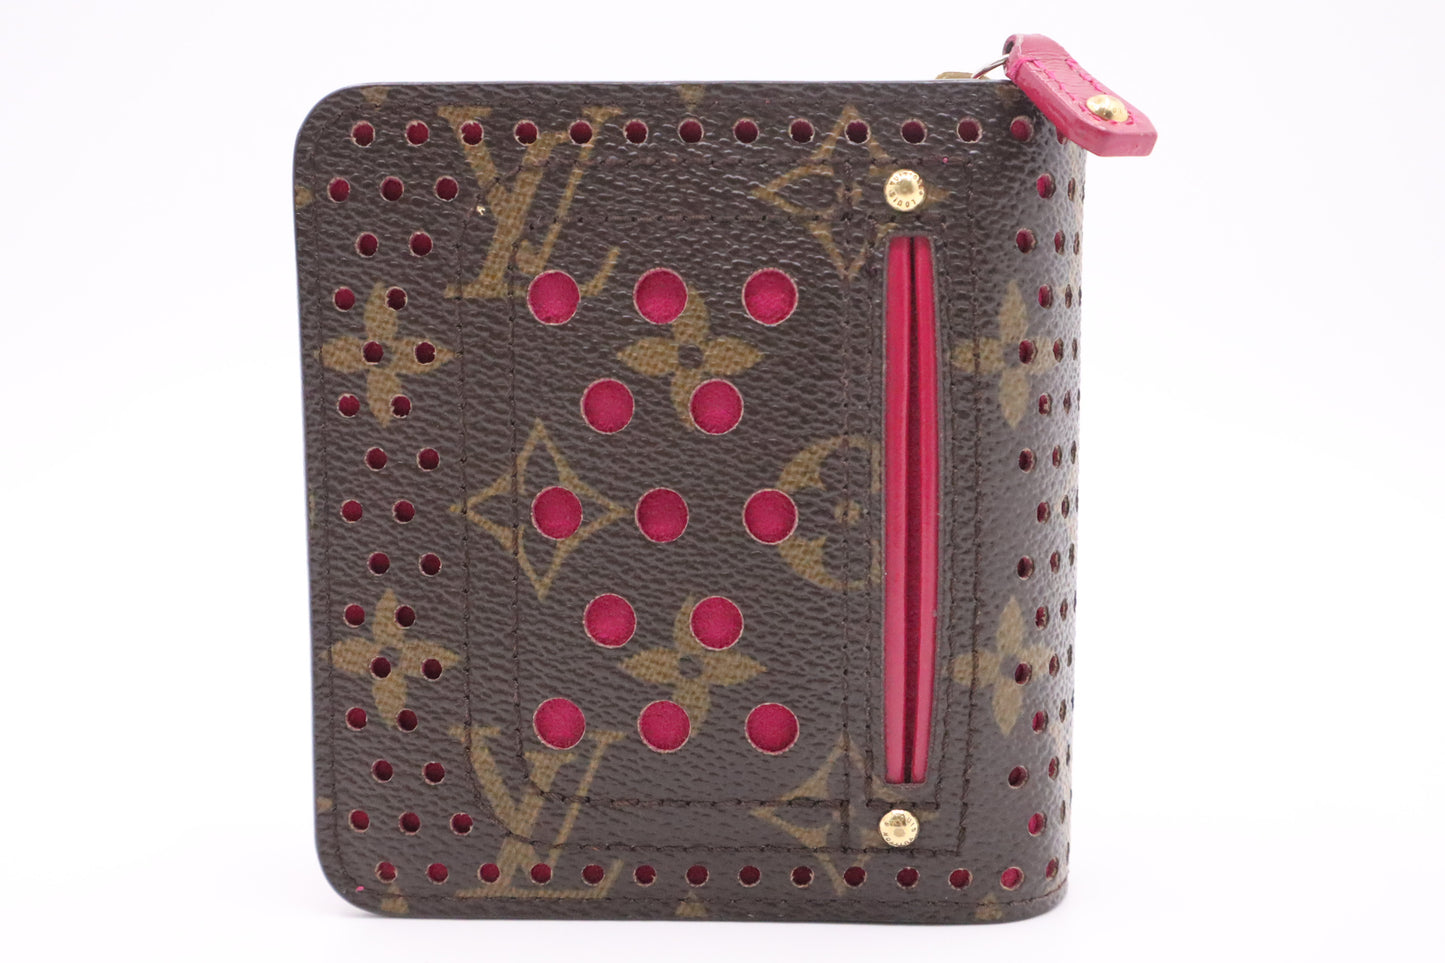 Louis Vuitton Compact Zippy in Perforated Monogram Canvas